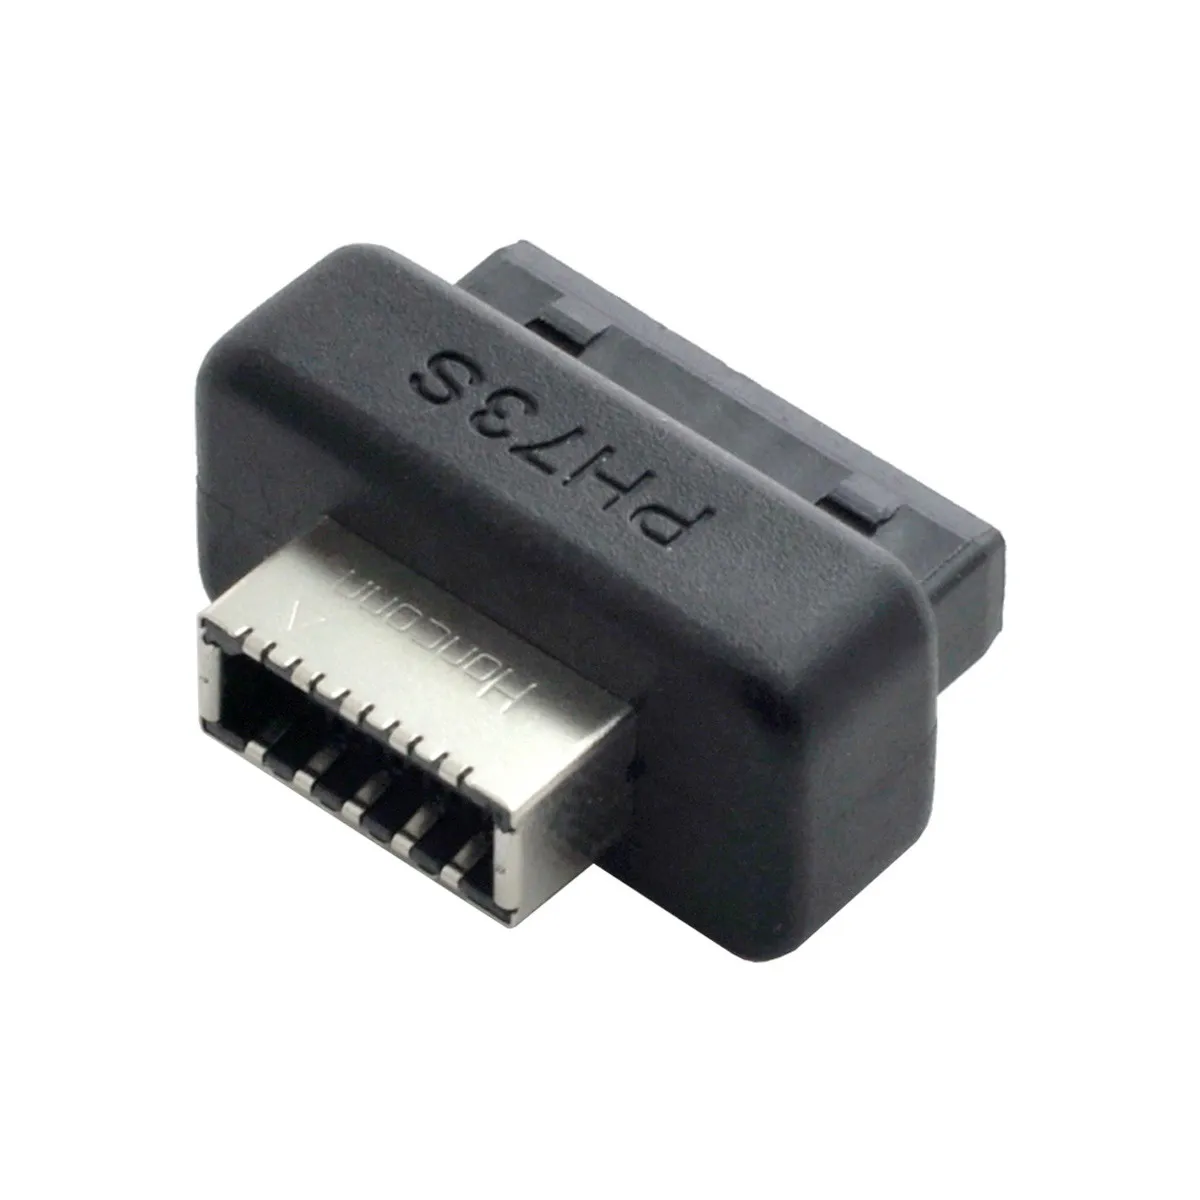 

USB 3.0 20Pin USB 3.1 Front Panel Socket Overmold Key-A Type-E to Header Male Extension Adapter